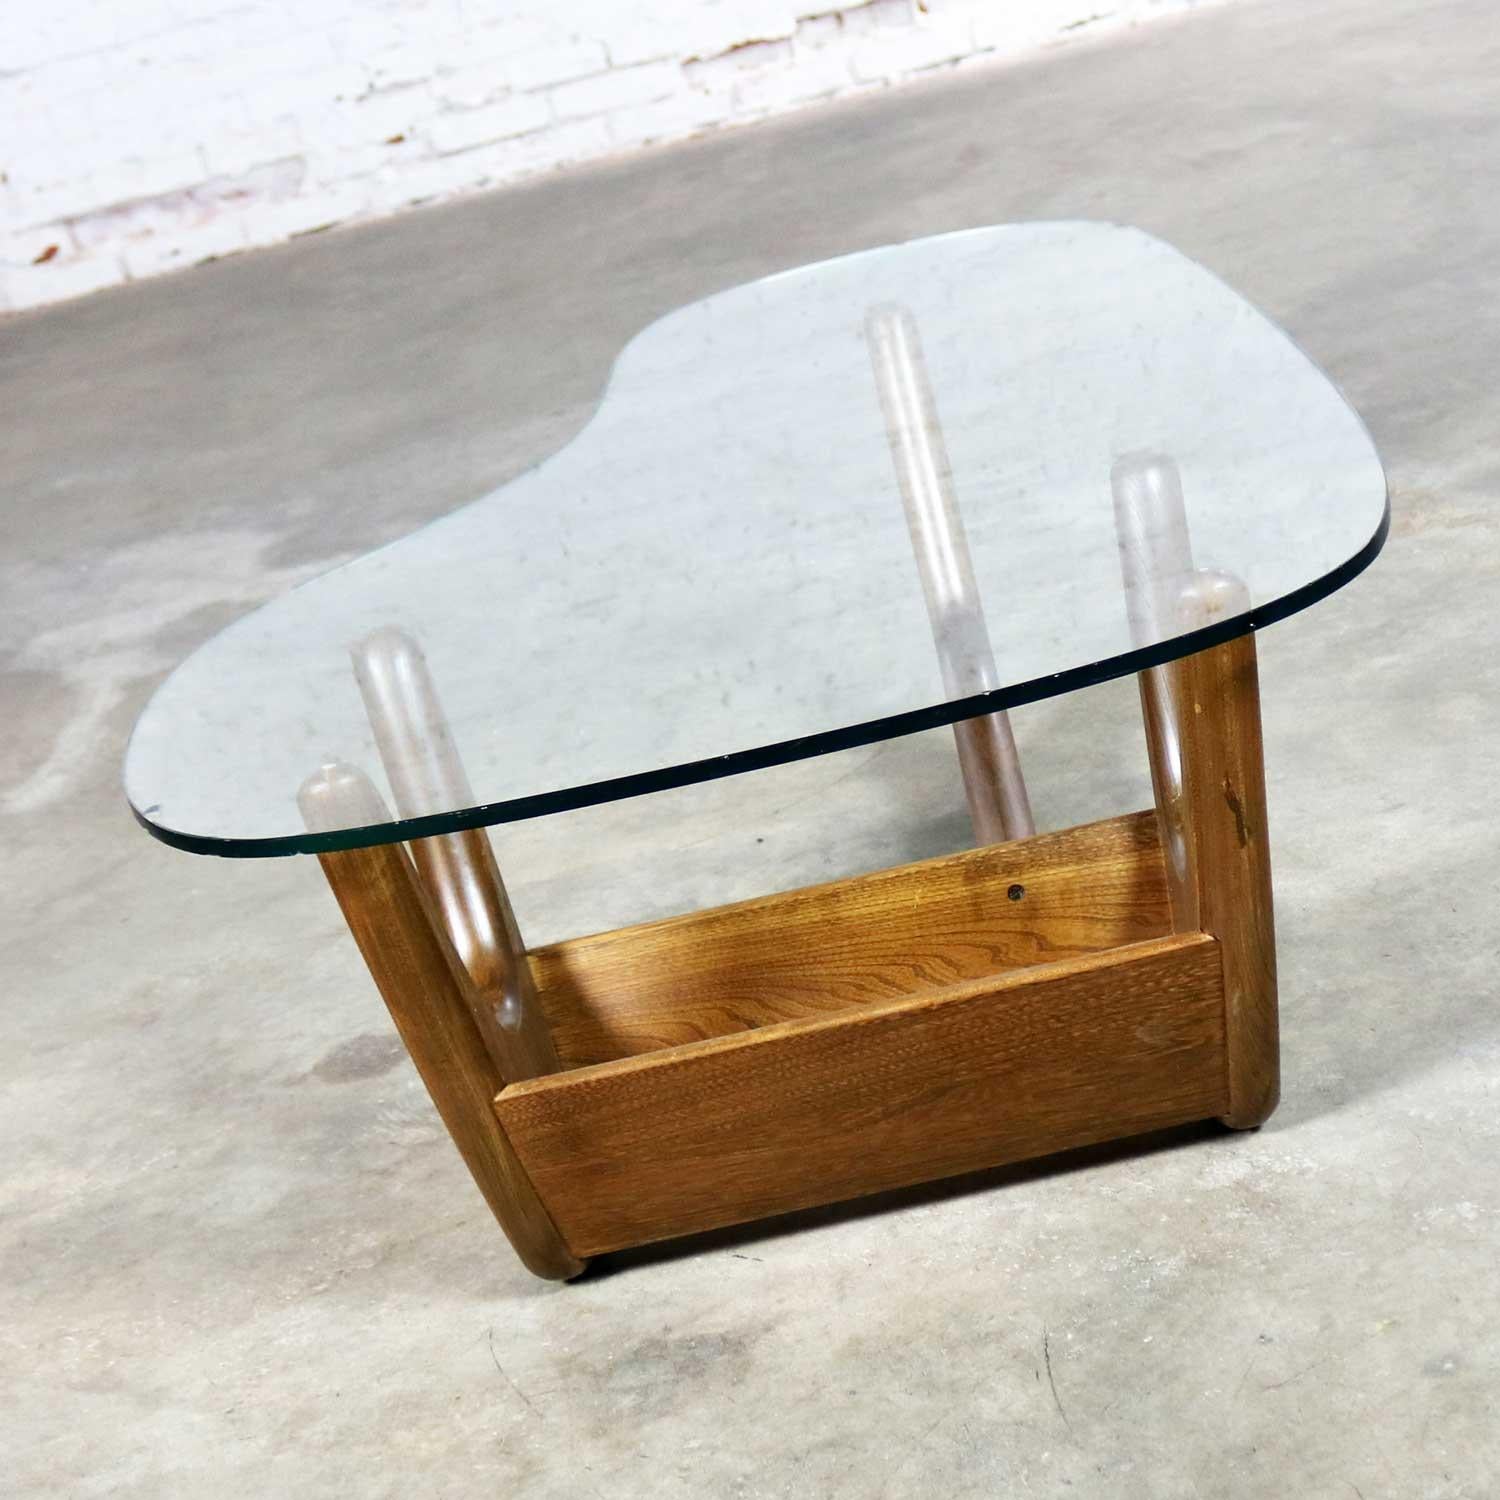 Glass Mid-Century Modern Biomorphic Coffee Table Attributed to Kroehler or Tonk